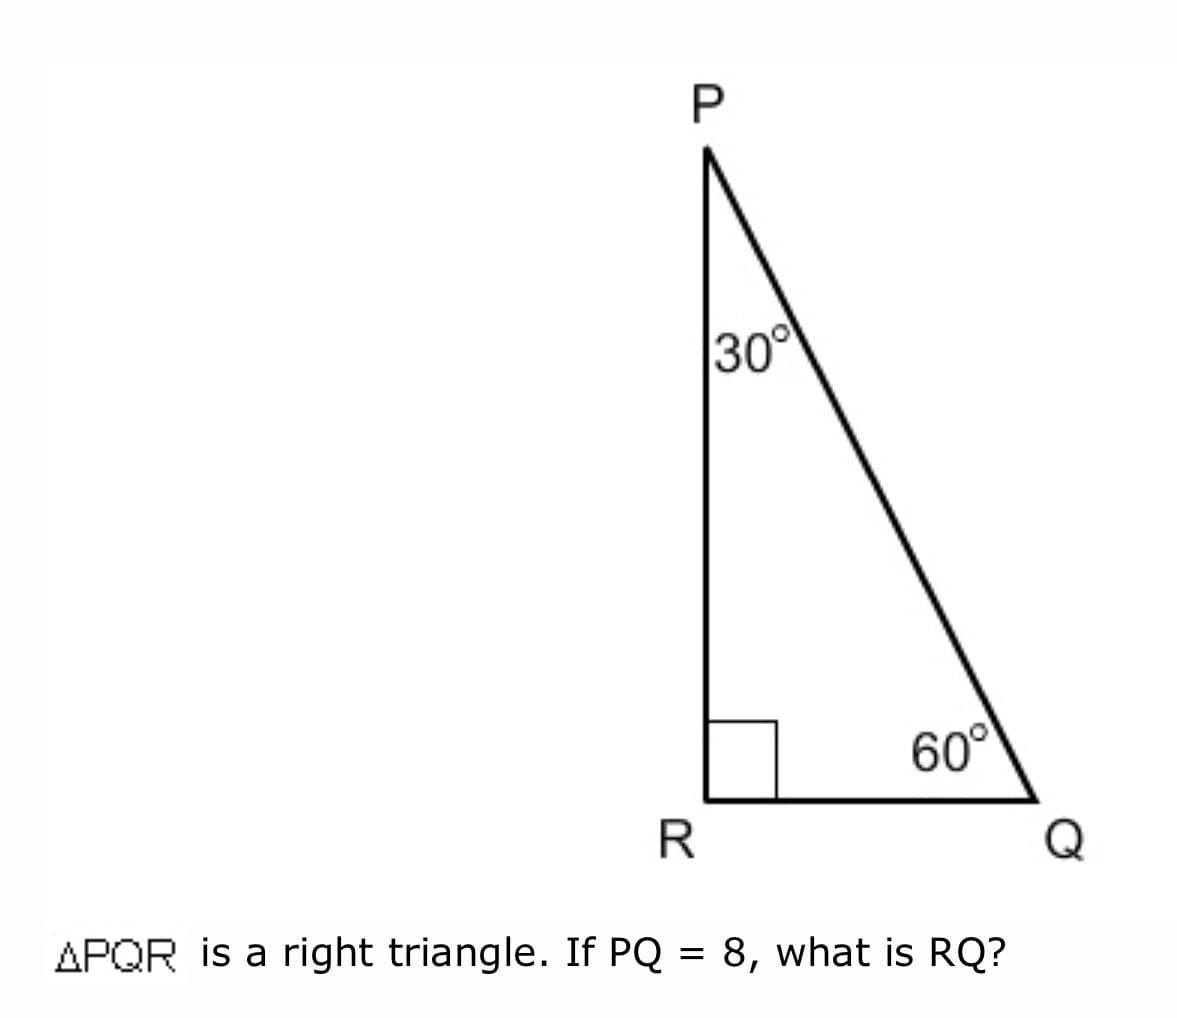 30
60°
Q
APQR is a right triangle. If PQ = 8, what is RQ?
%3D
P.
